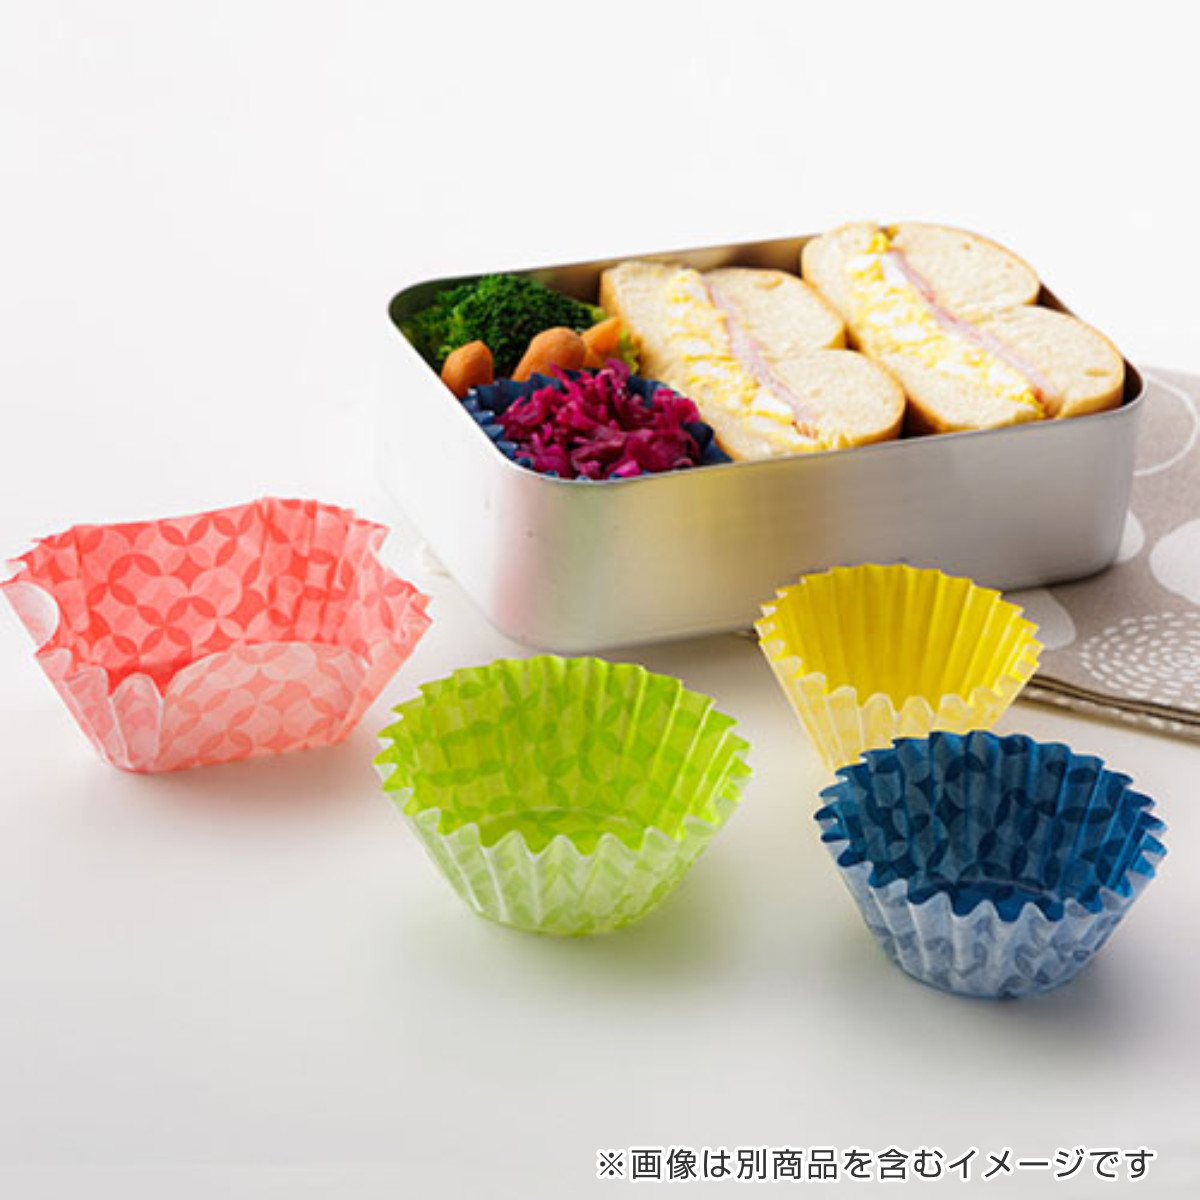  side dish cup 38 sheets entering deep type L size anti-bacterial (.. present cup anti-bacterial processing 38 piece entering side dish inserting . present child made in Japan )